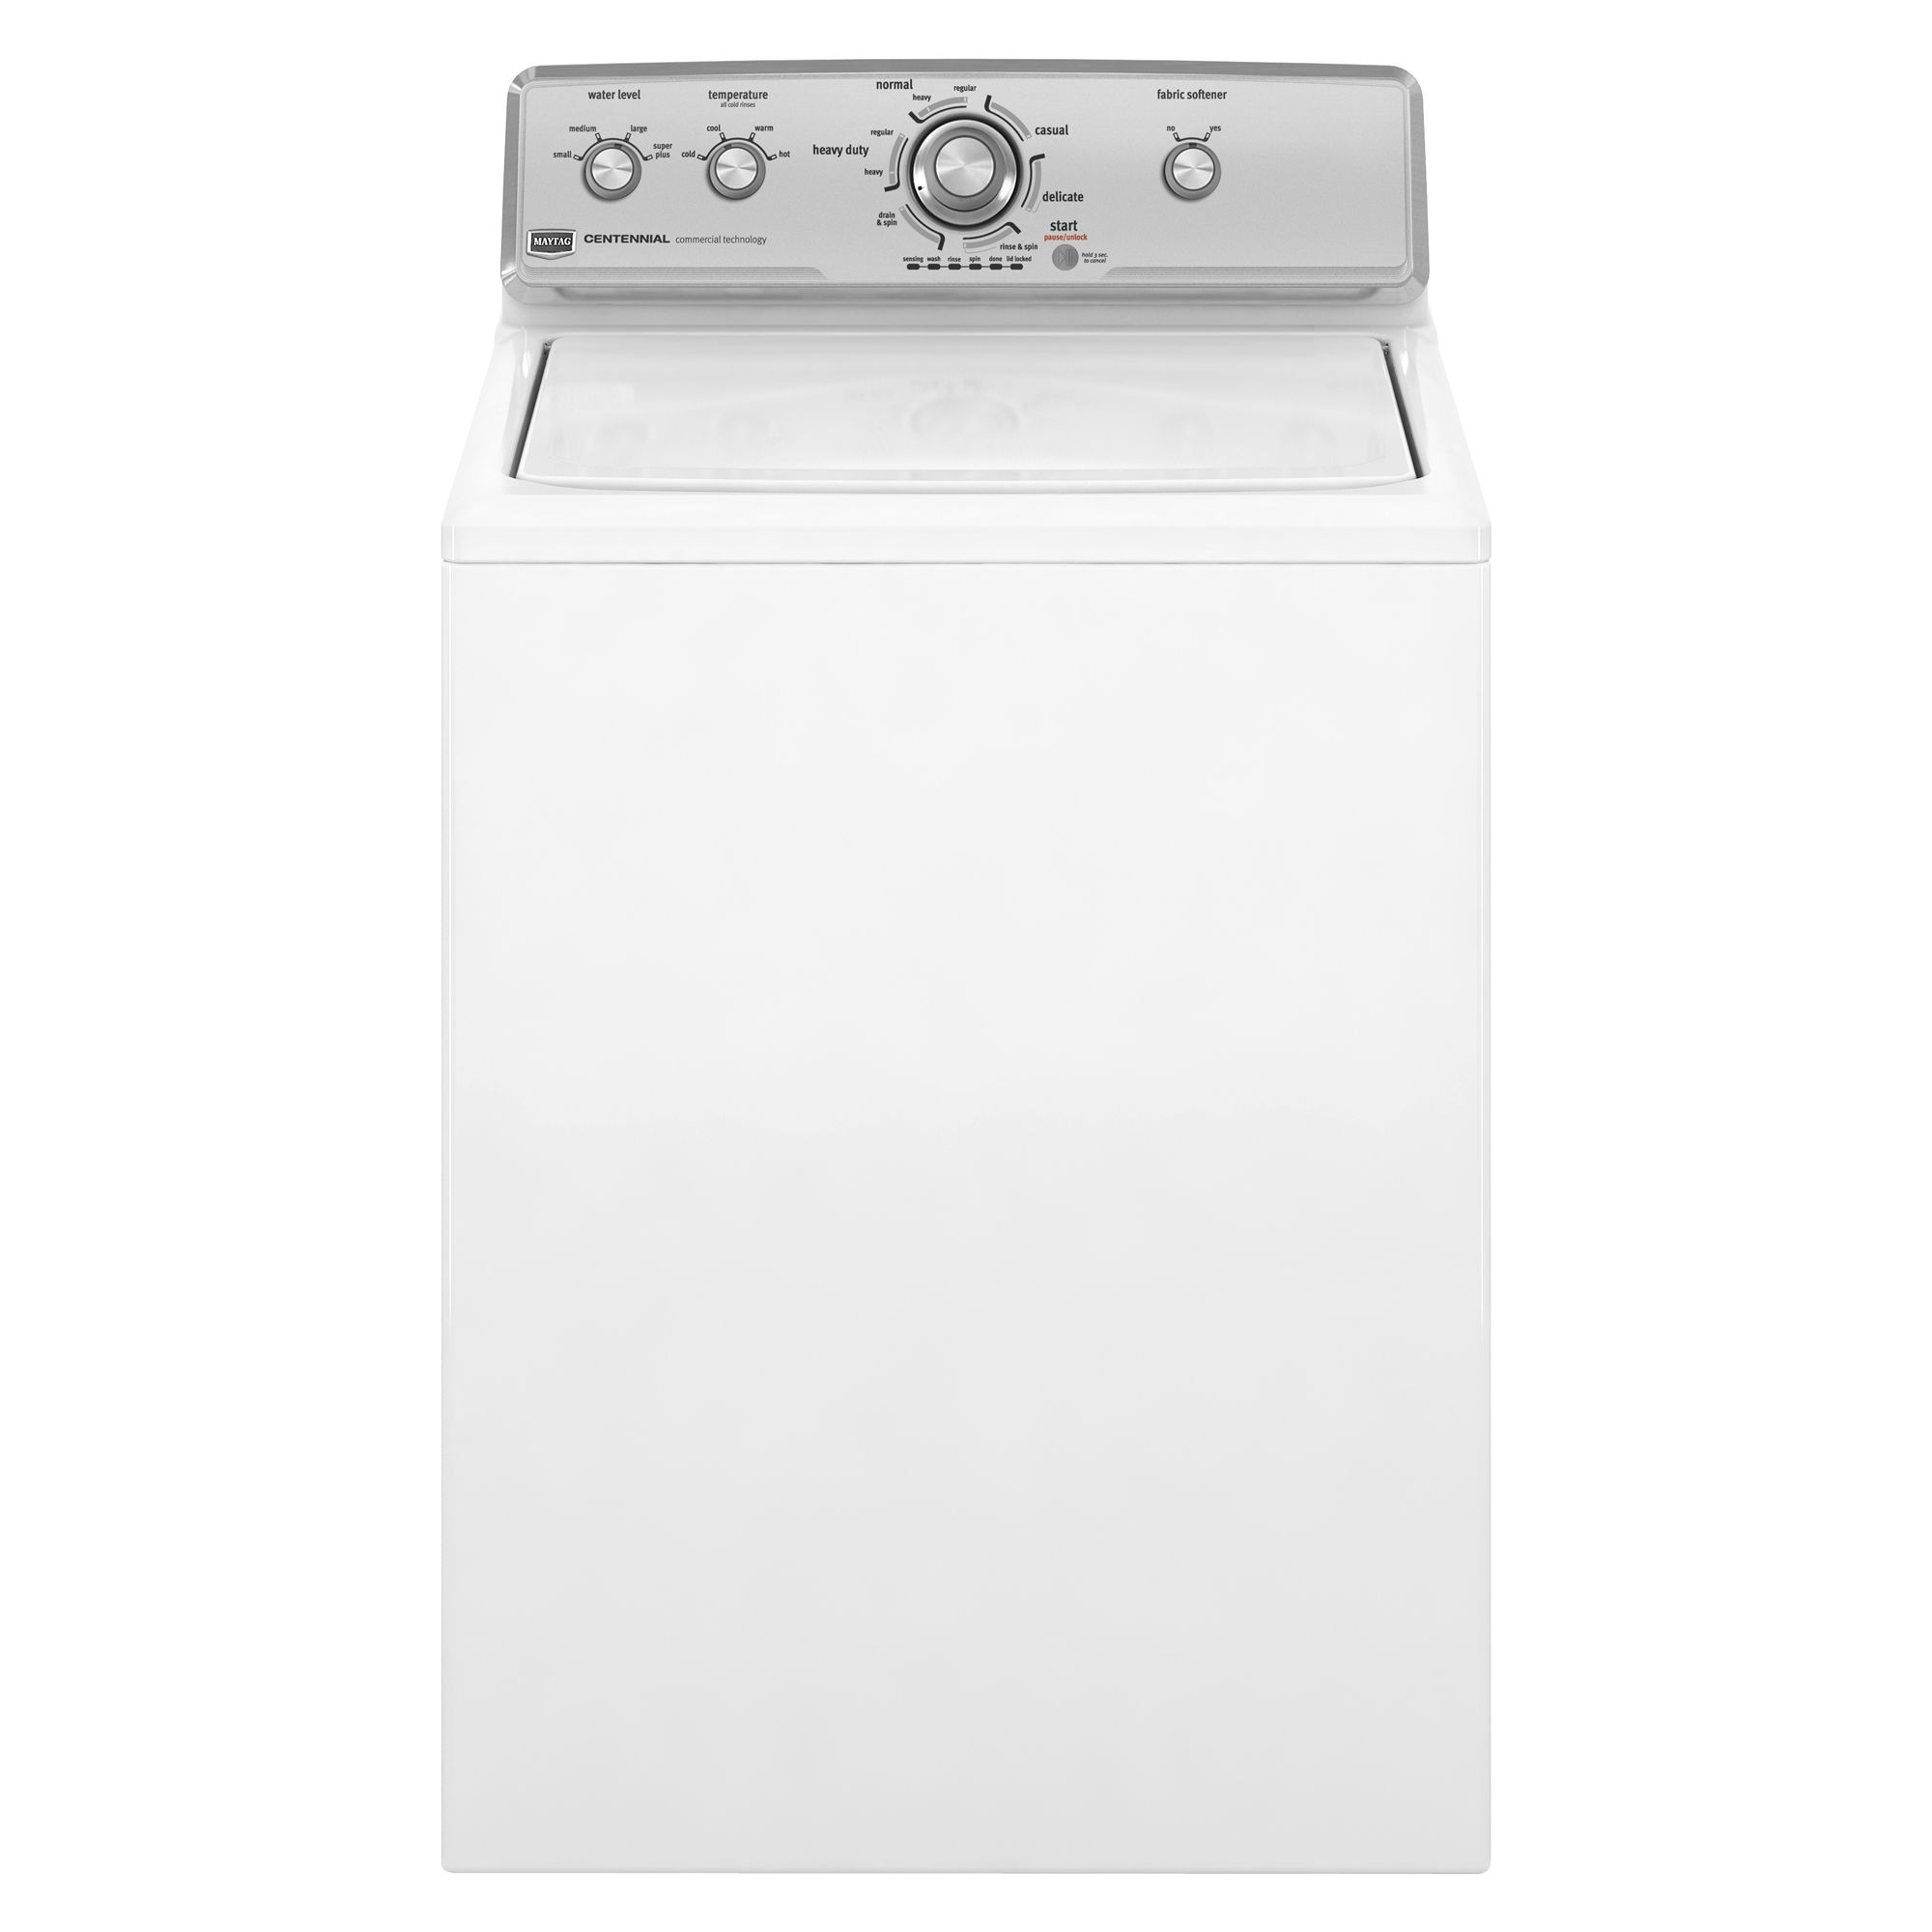 Maytag 3.4 cu. ft. Top Load Washer - White